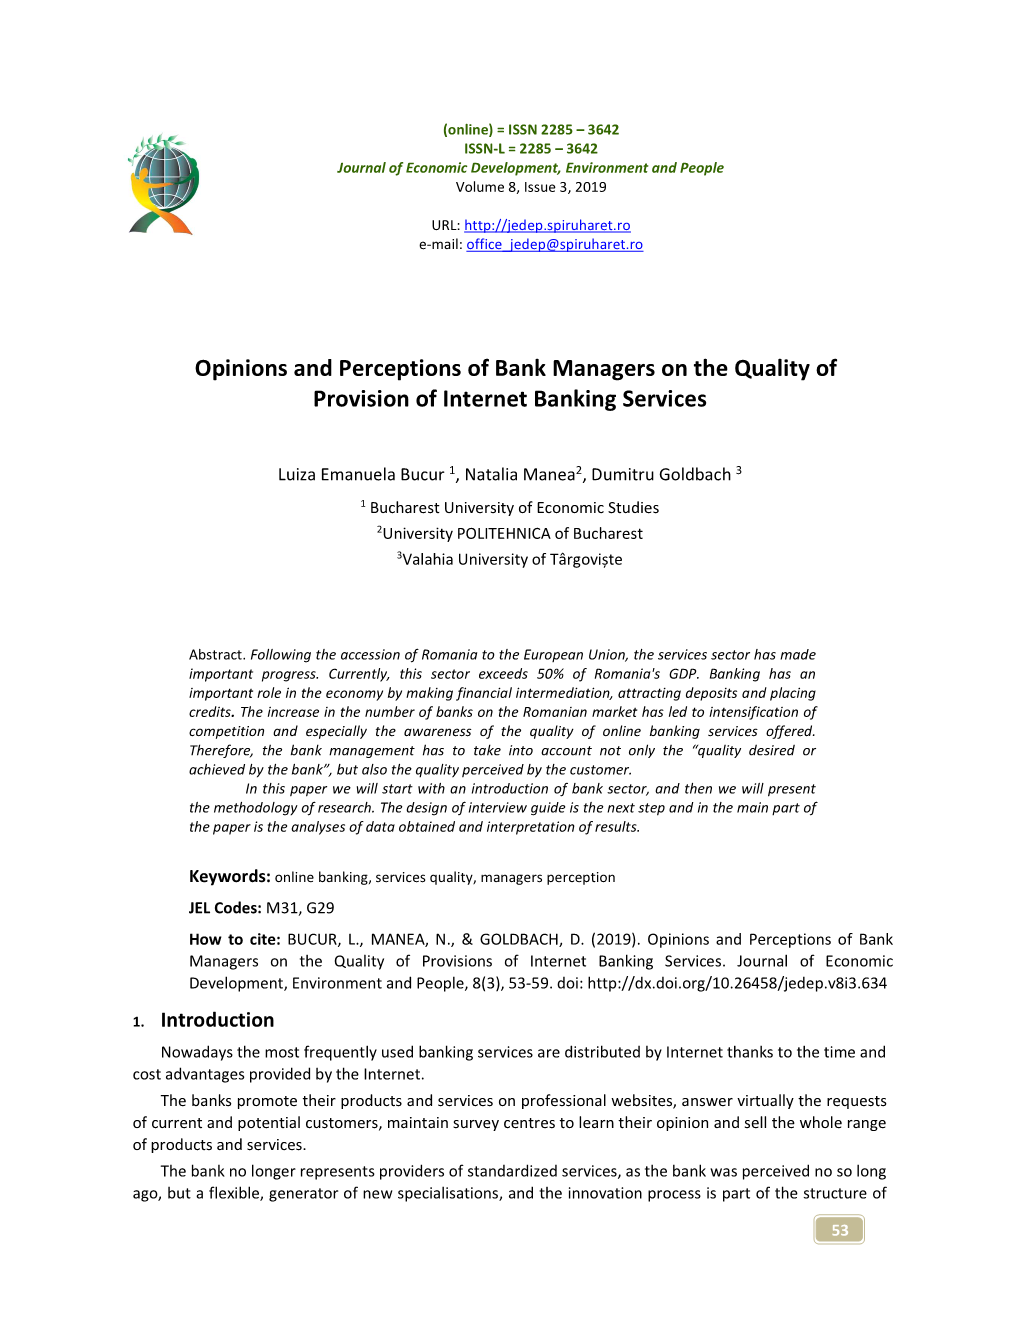 Opinions and Perceptions of Bank Managers on the Quality of Provision of Internet Banking Services